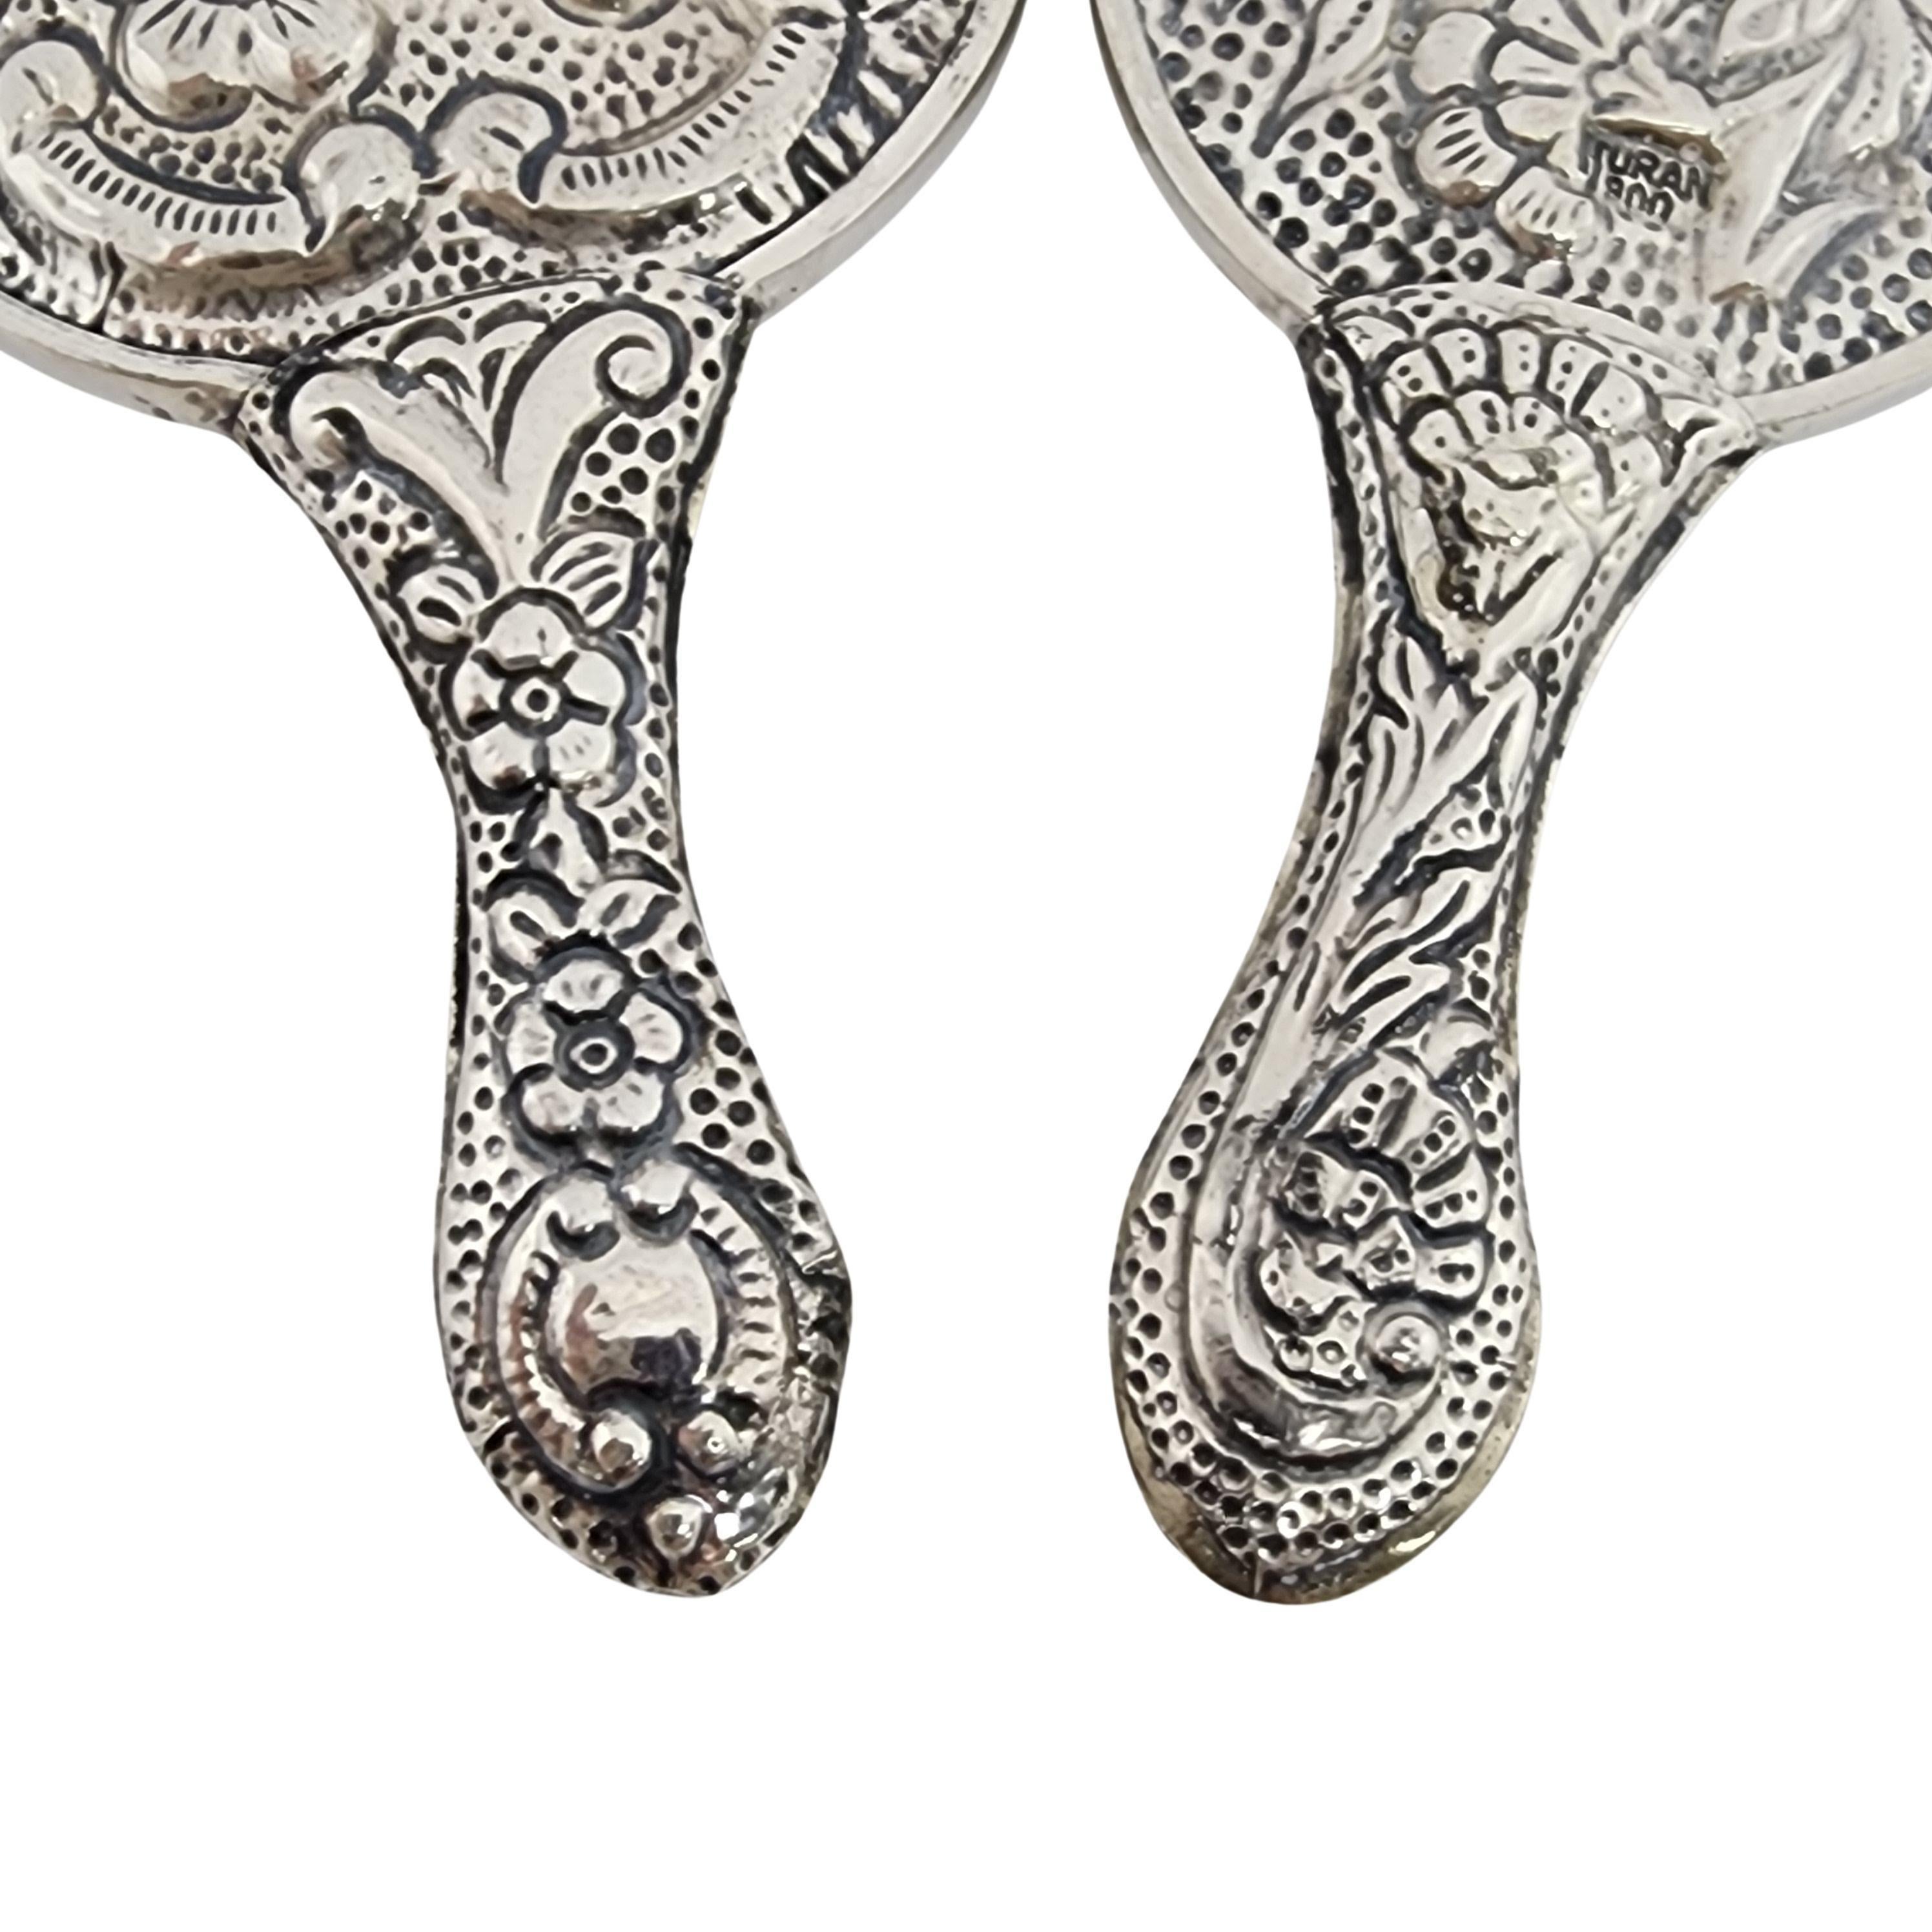 Set of 2 Turan Turkey 900 Silver Repousse Hand Mirrors #15964 For Sale 1